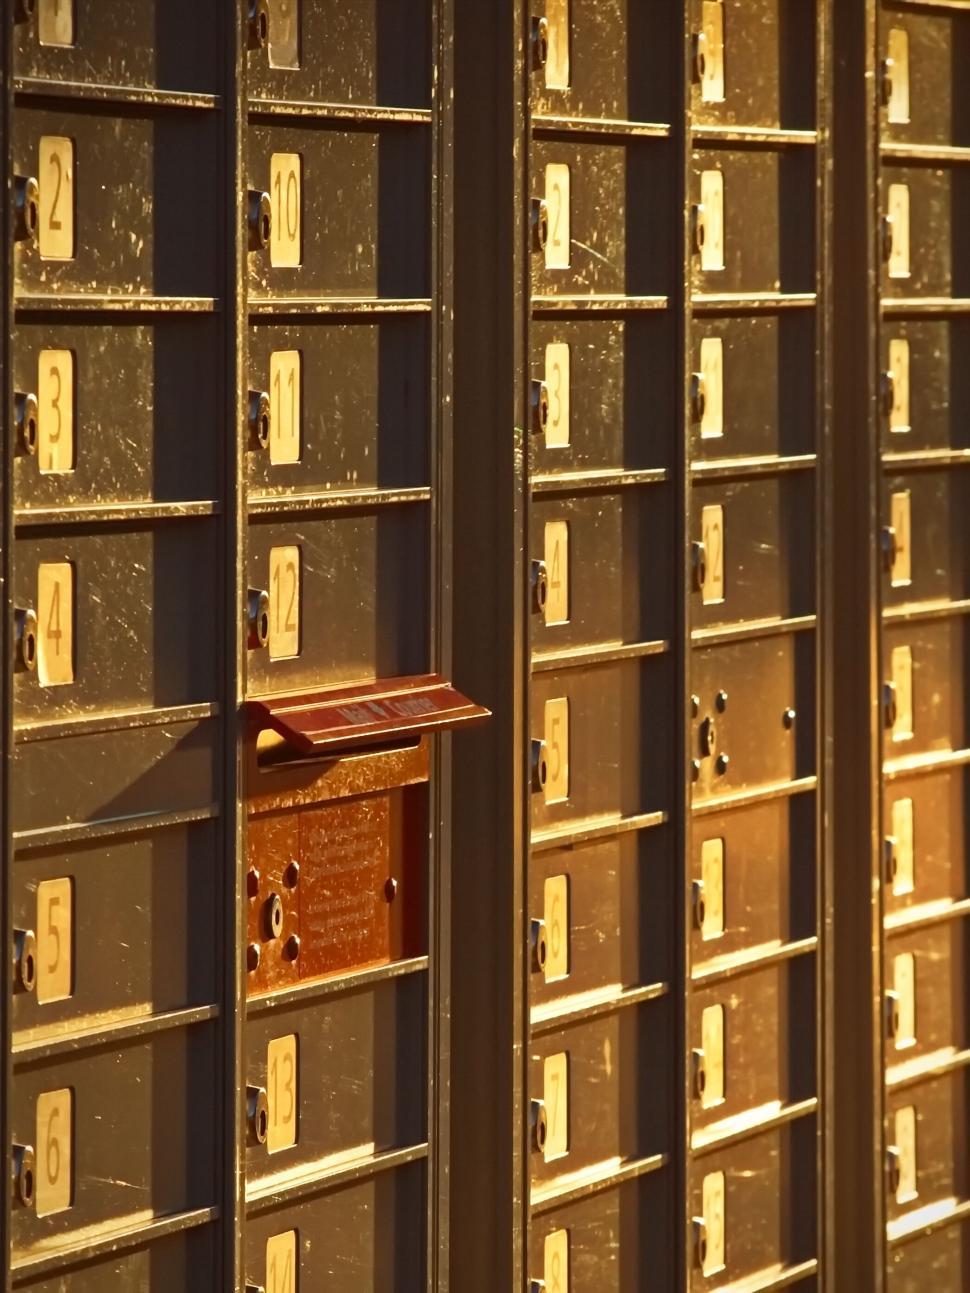 Free Image of Mailboxes with an open one catching light 